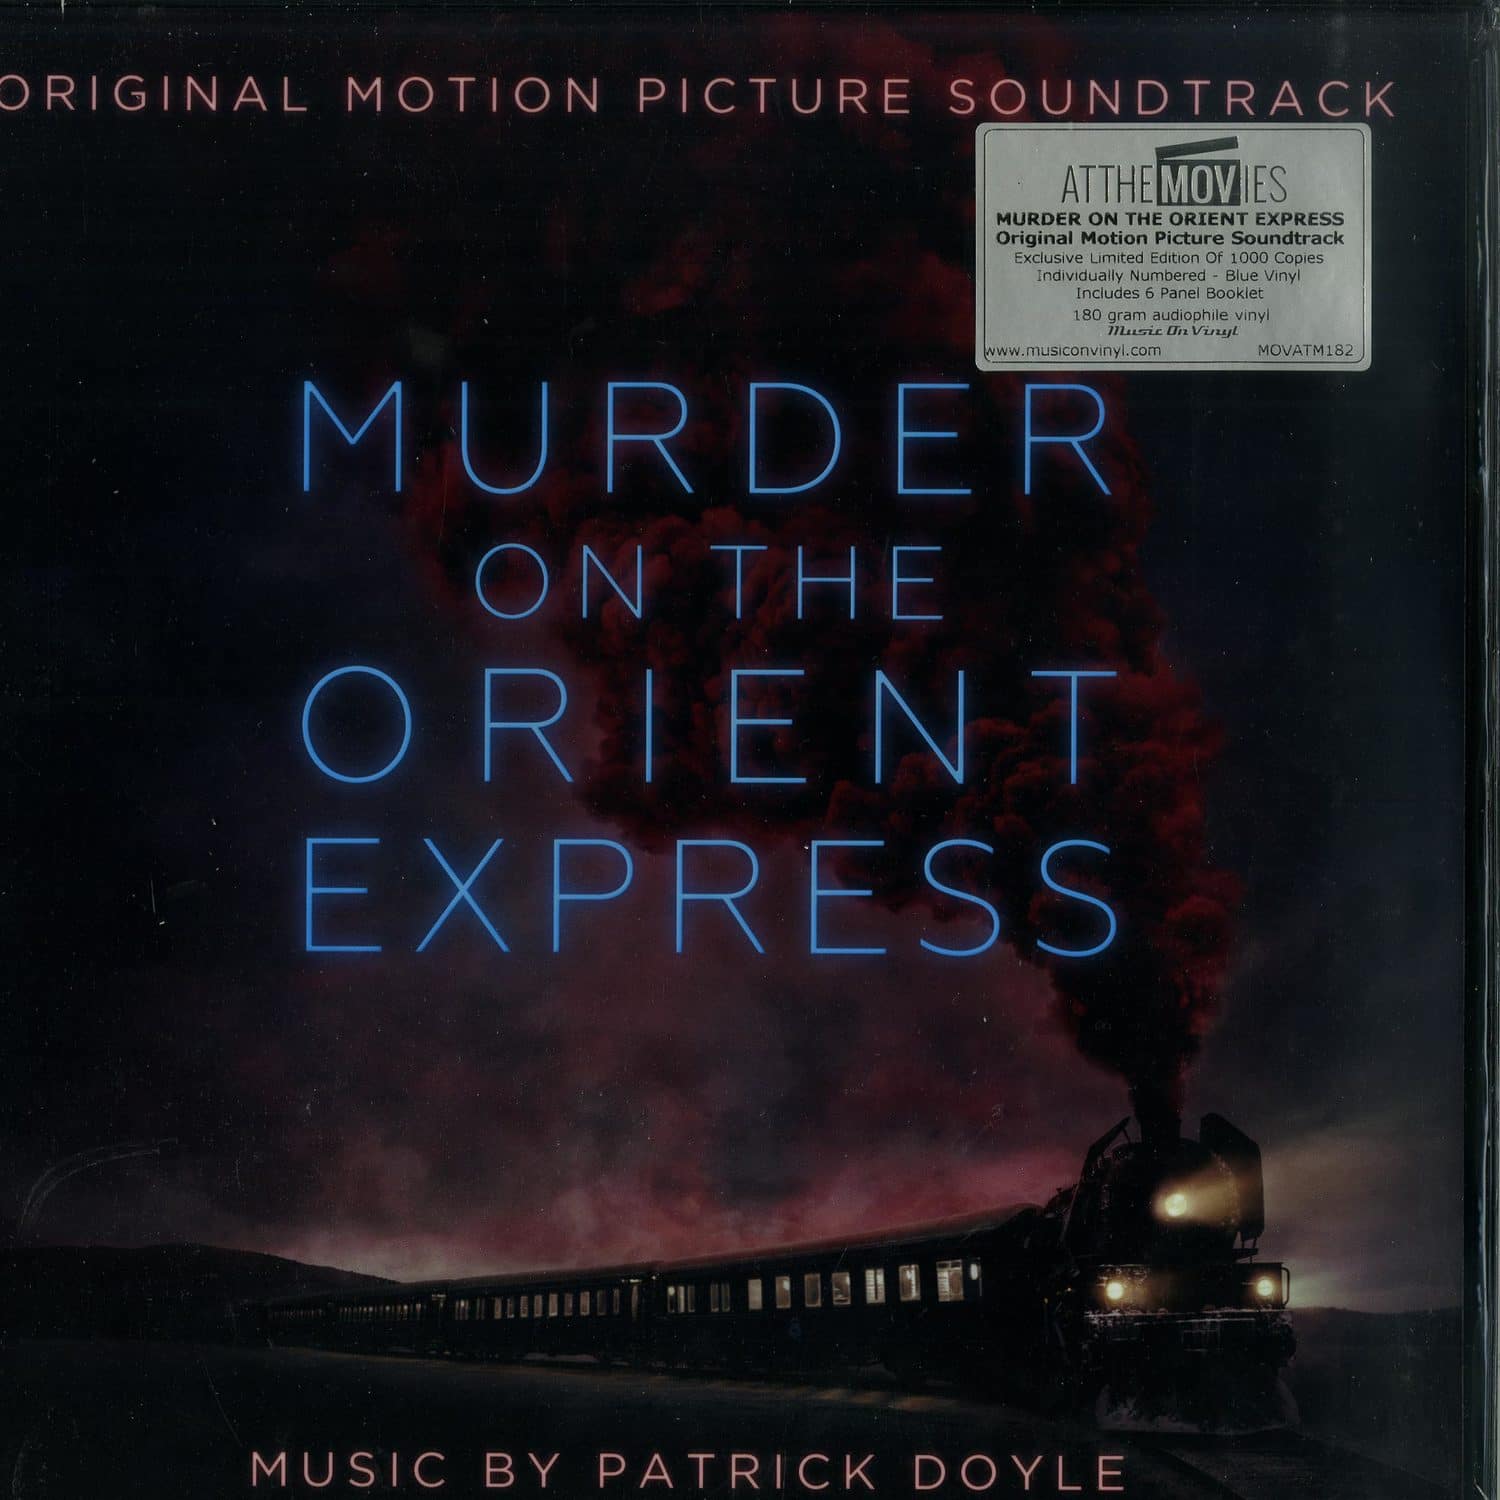 Patrick Doyle - MURDER ON THE ORIENT EXPRESS O.S.T. 